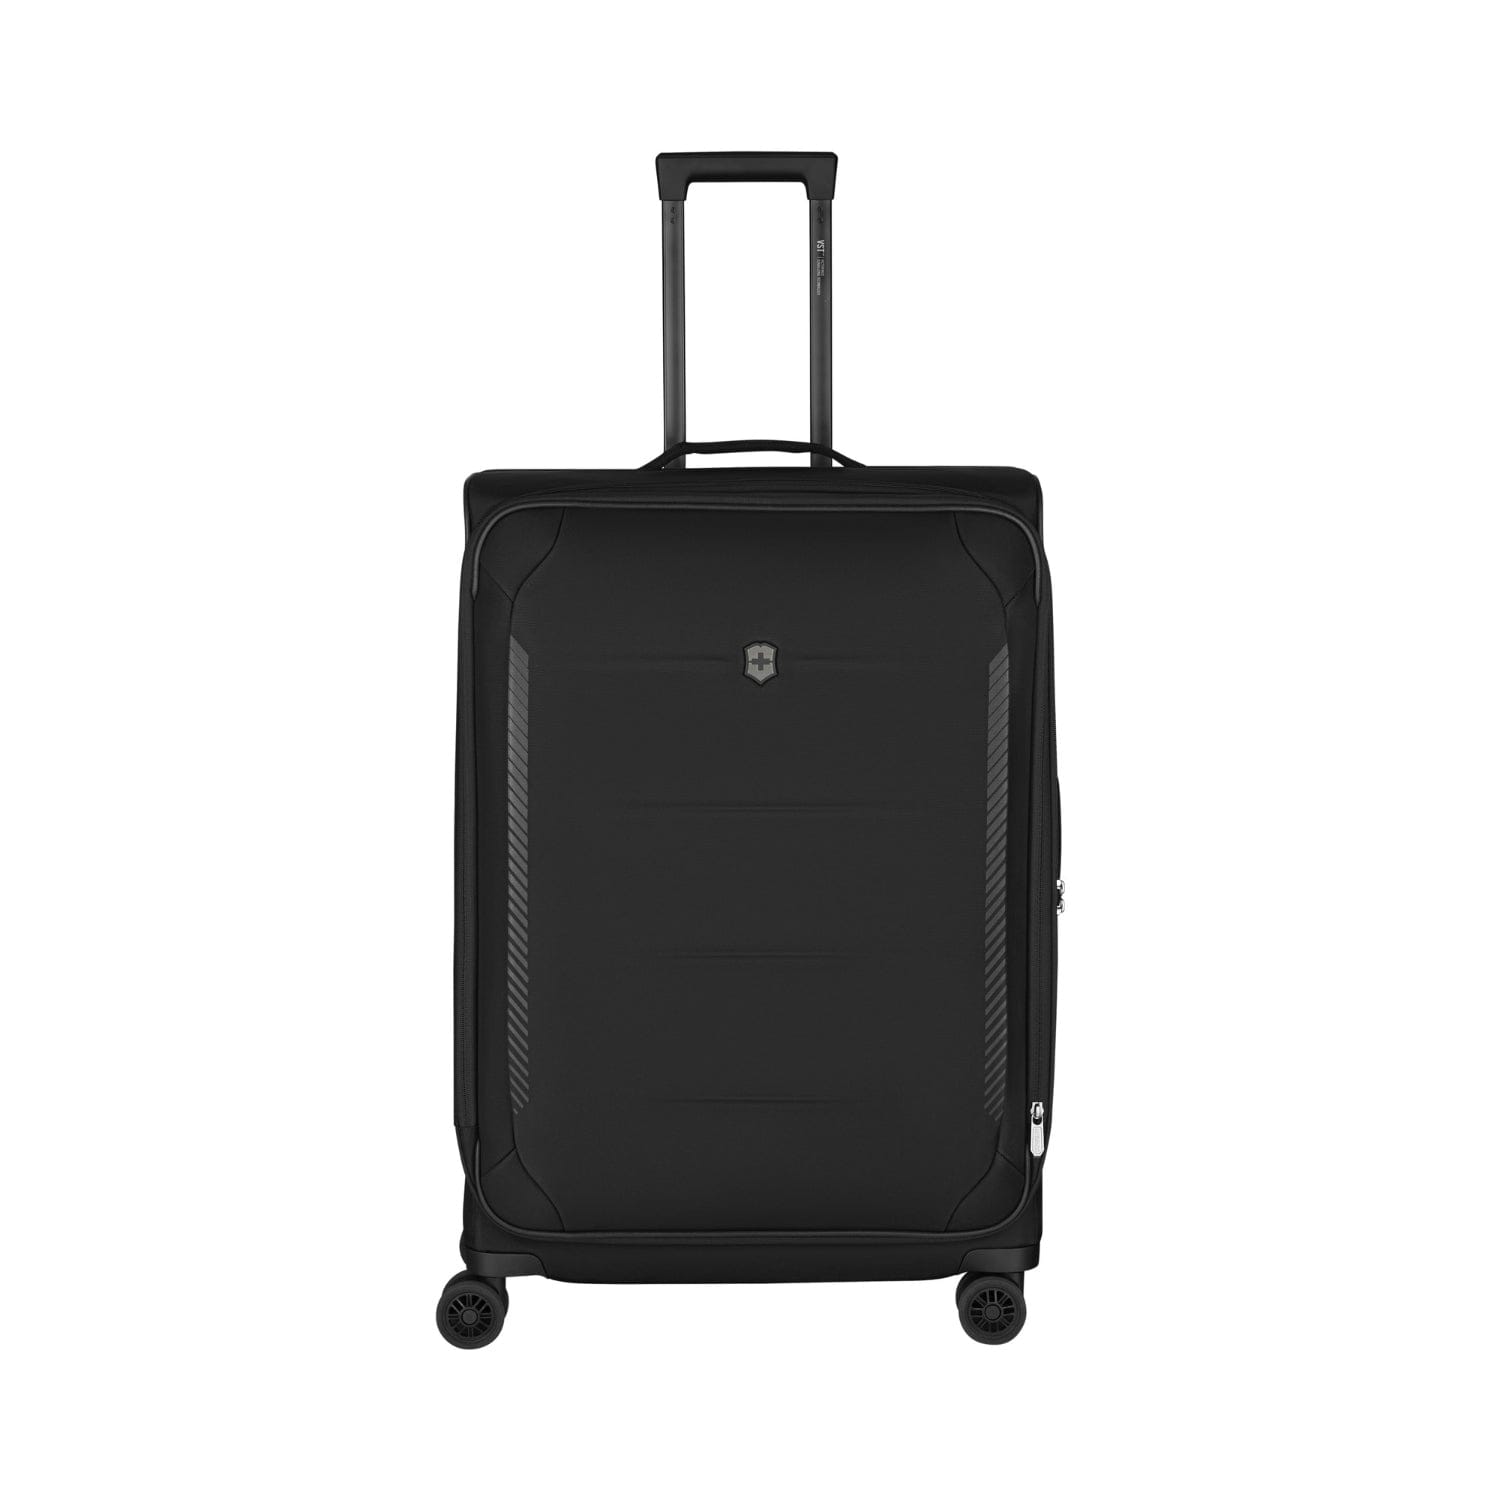 Victorinox Cross Light 76cm Hardside Expandable Check-In Luggage Trolley Black - 612421